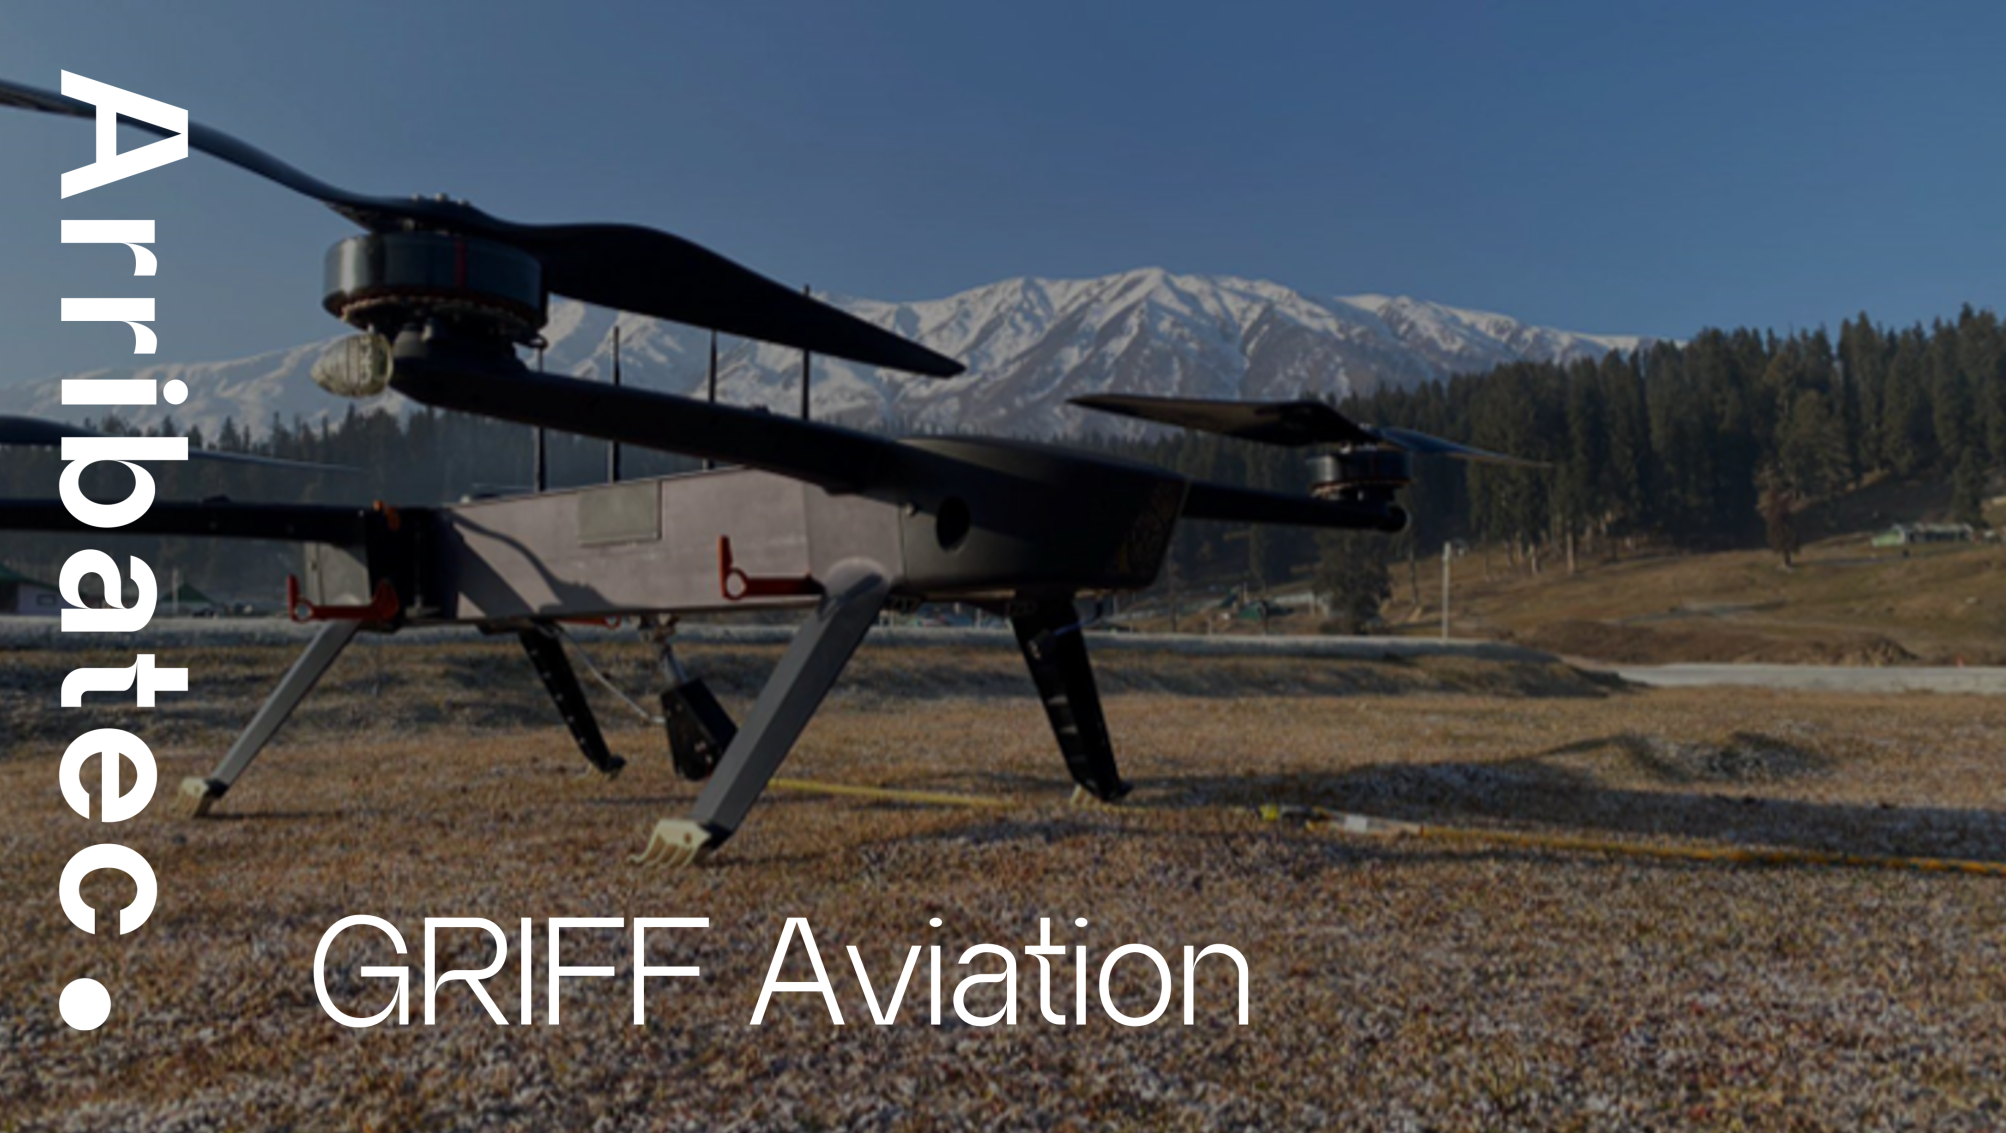 Picture of drone from GRIFF Aviation with an overlay of Arribatec's logo and the text "GRIFF Aviation"